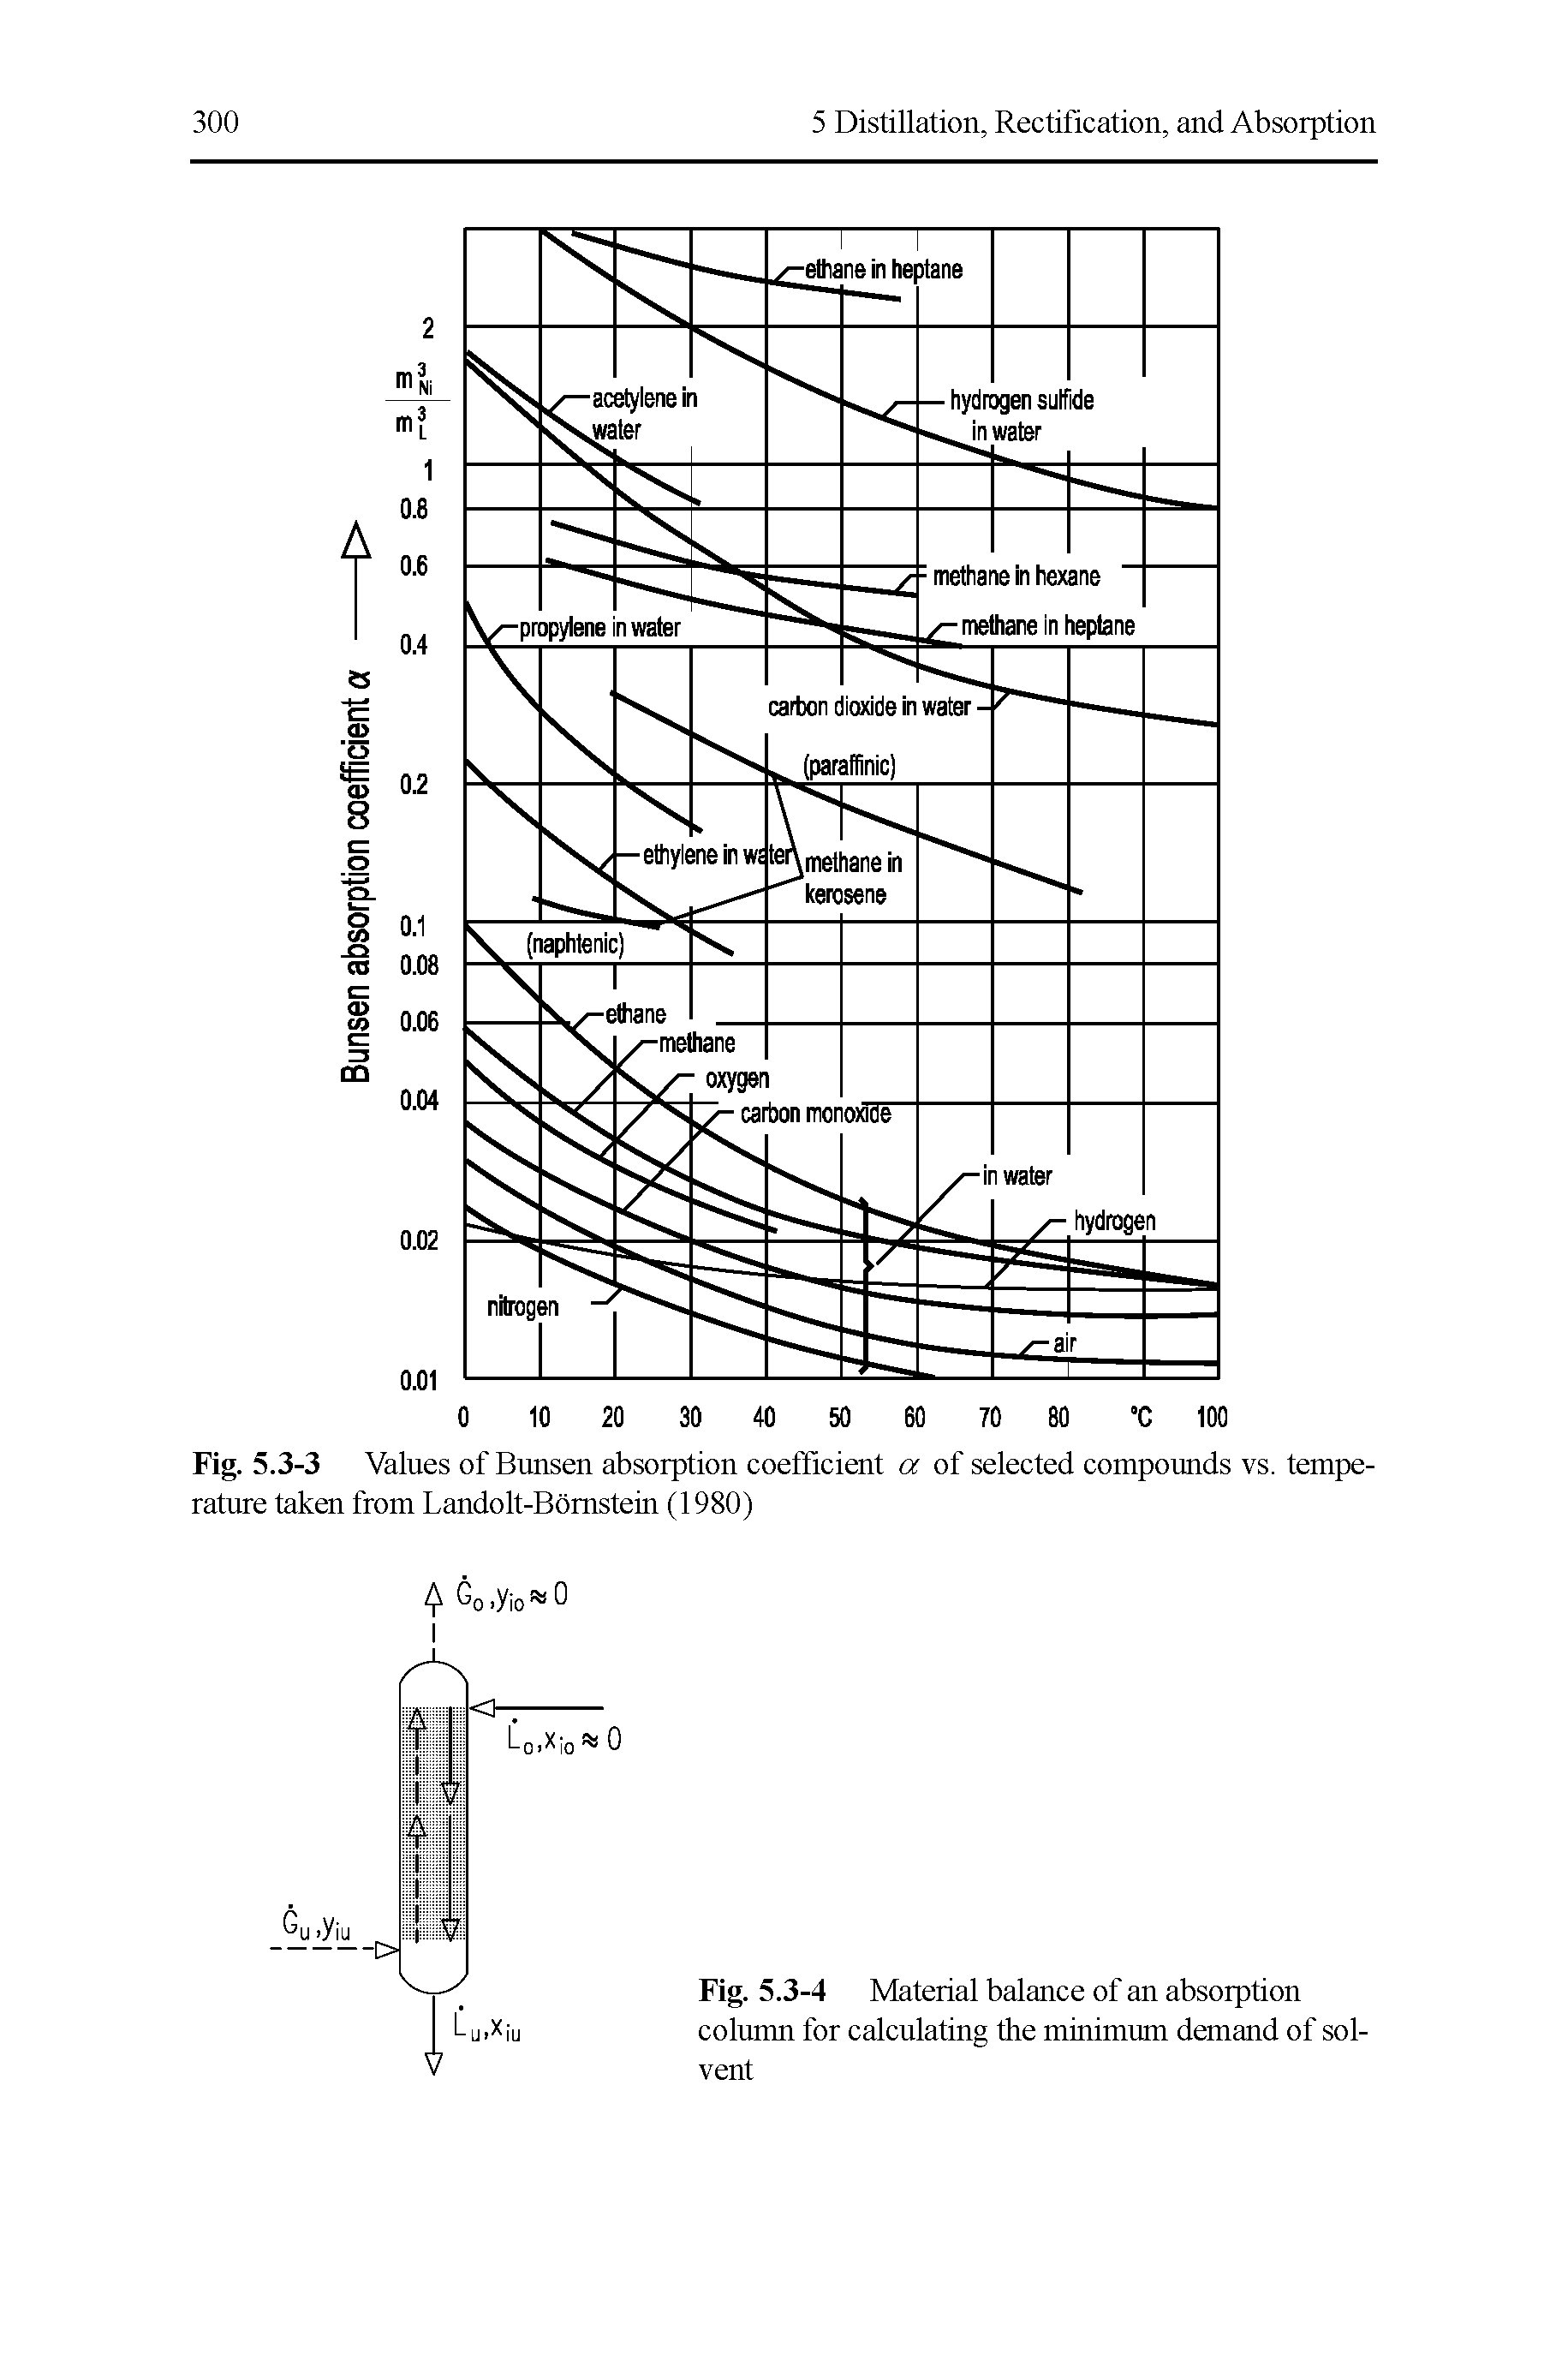 Fig. 5.3-3 Values of Bunsen absorption coefficient a of selected compounds vs. temperature taken from Landolt-Bomstein (1980)...